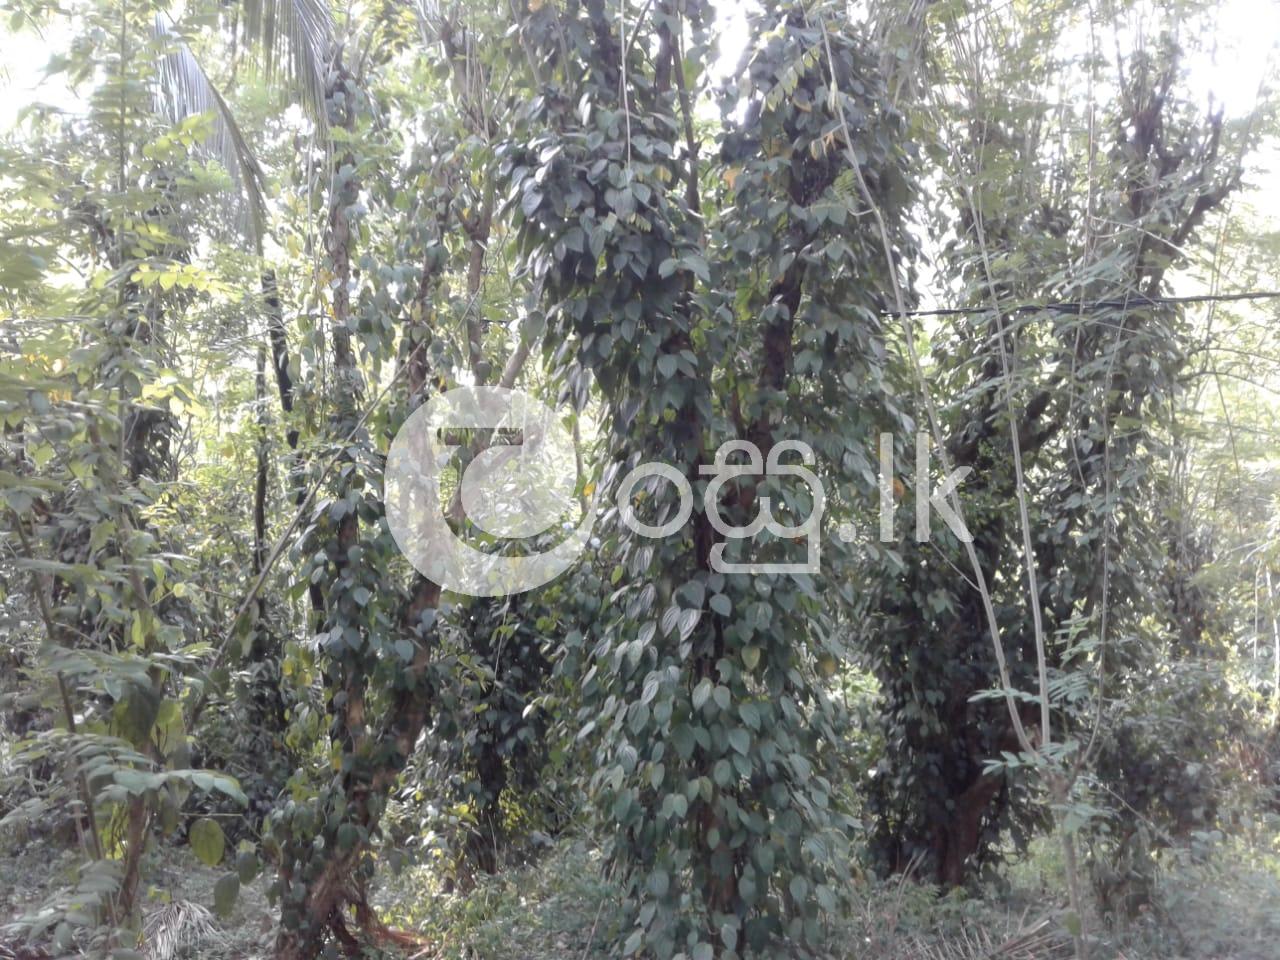 Rubber and Pepper Agriculture Land for Sale in Wellawaya Land in Wellawaya